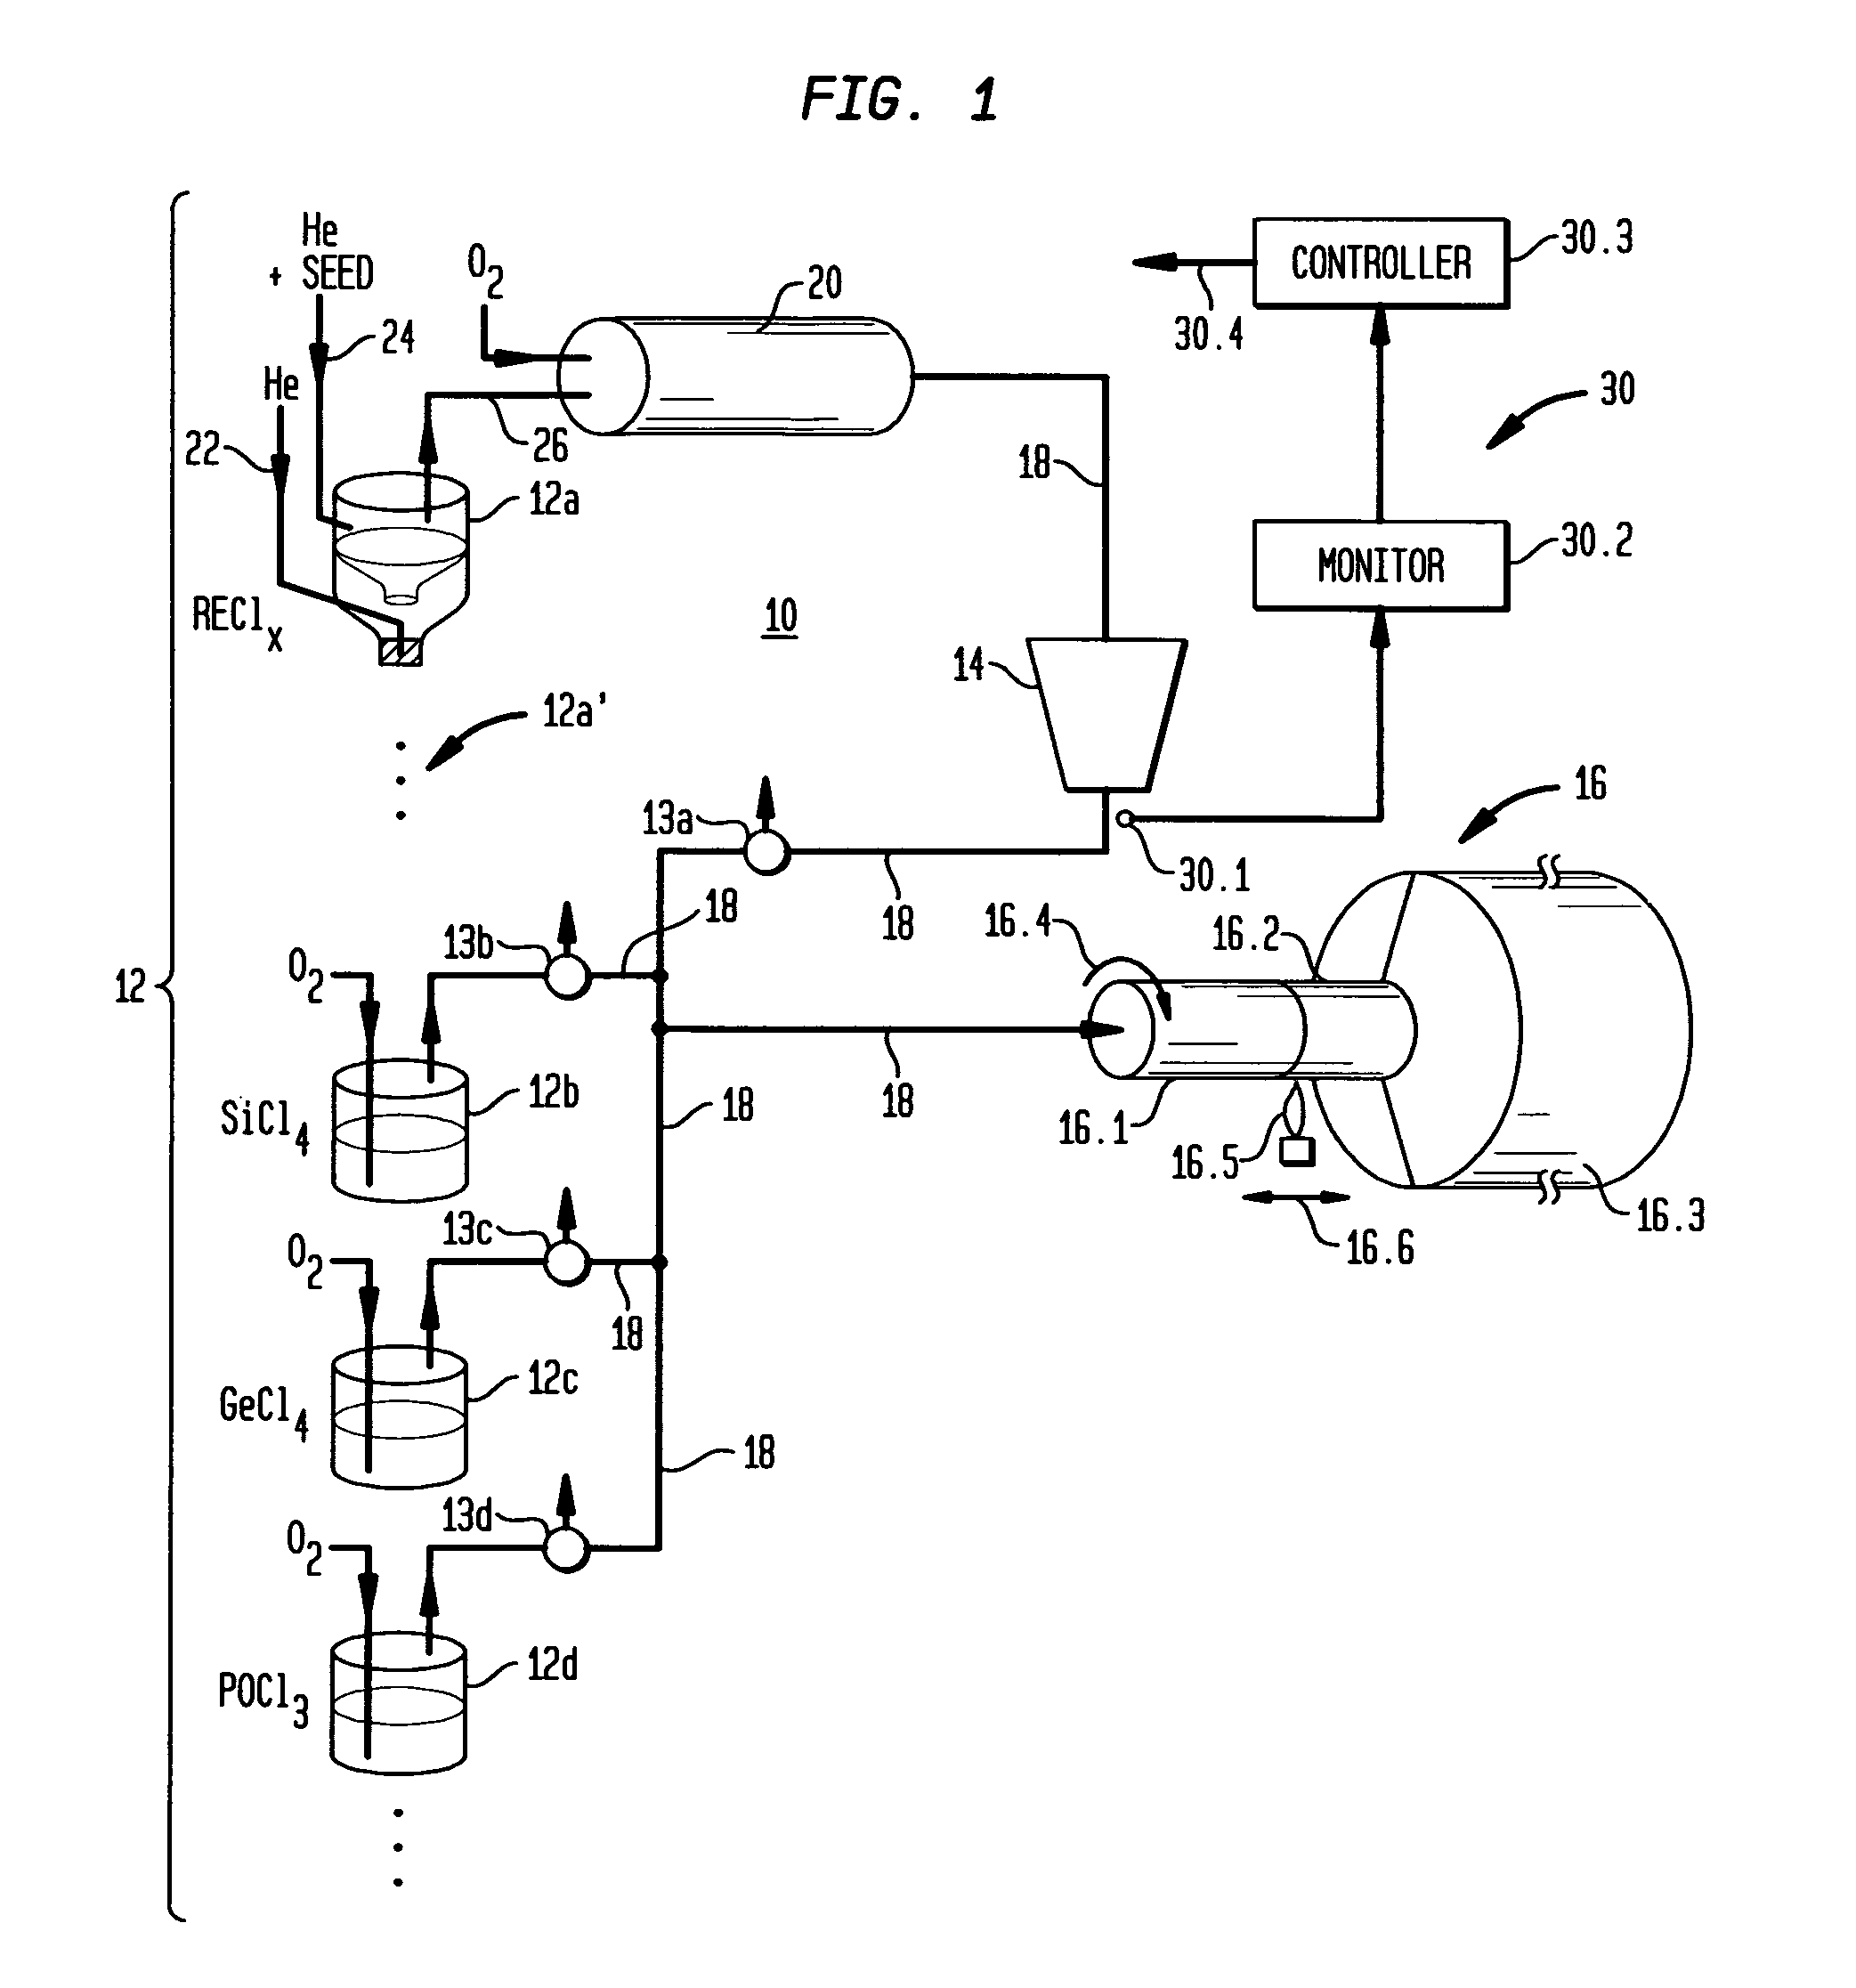 Apparatus and method for fabricating glass bodies using an aerosol delivery system